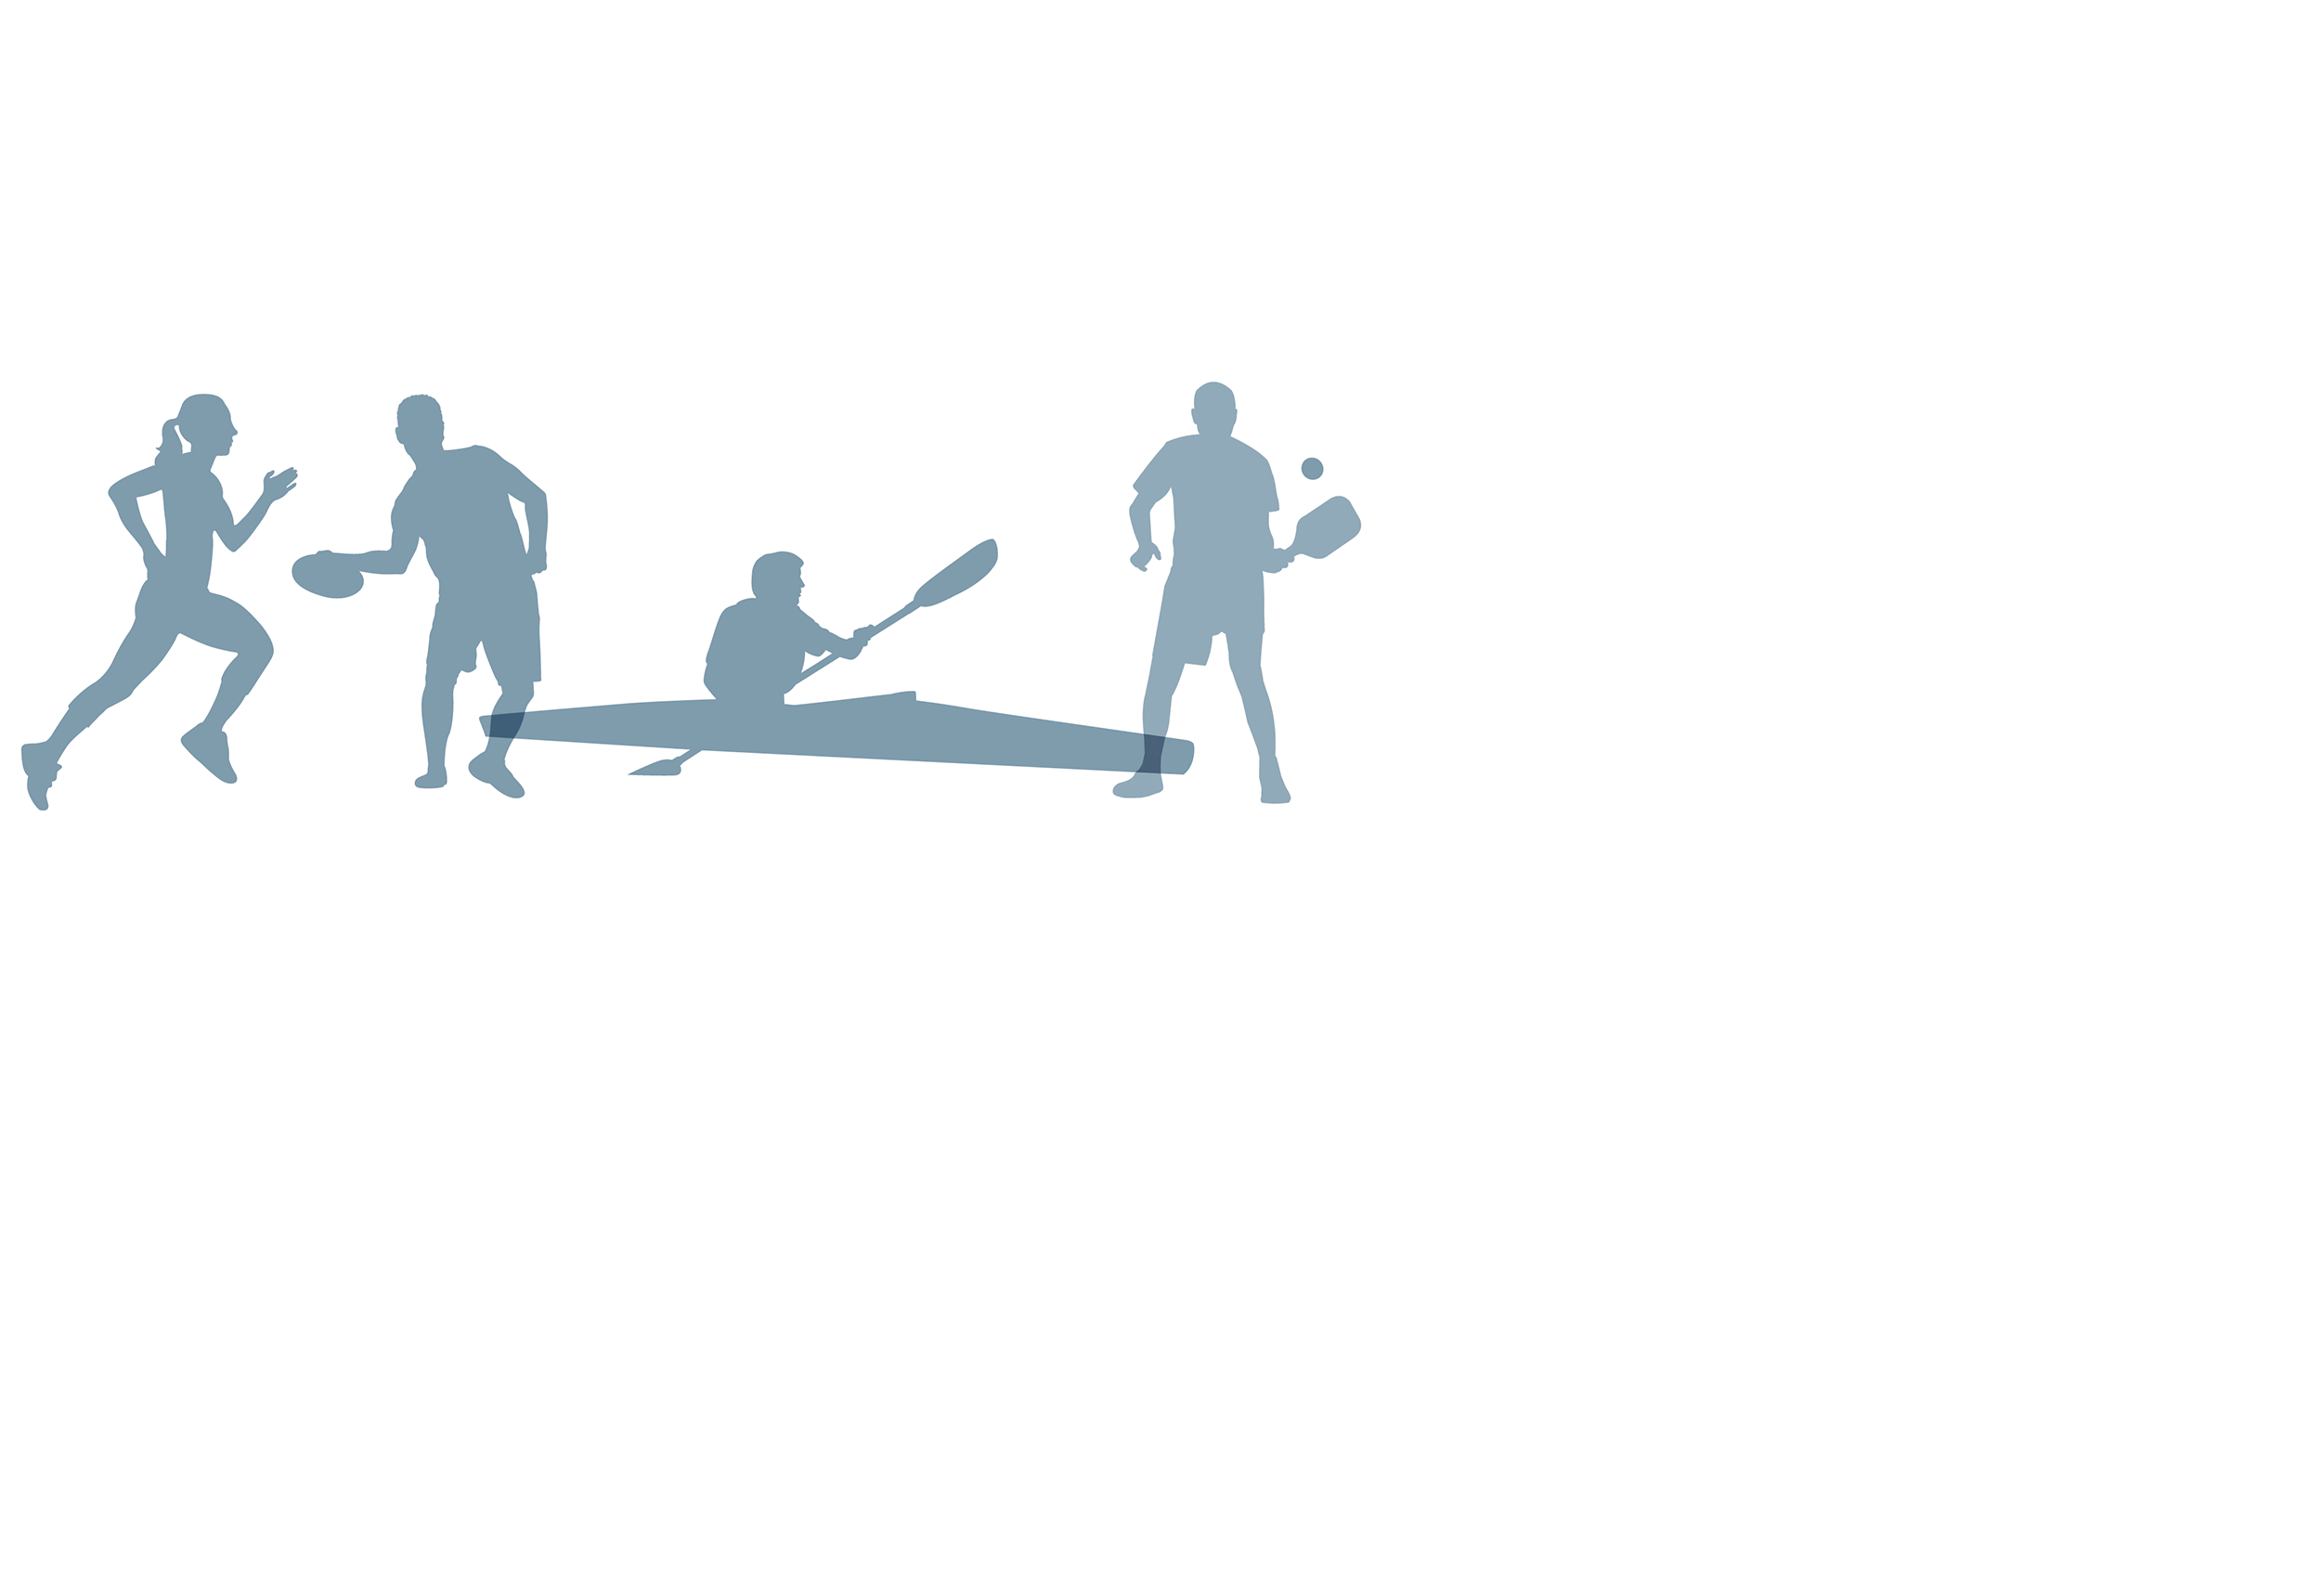 In A League of Their Own title; silhouettes of people performing different sports